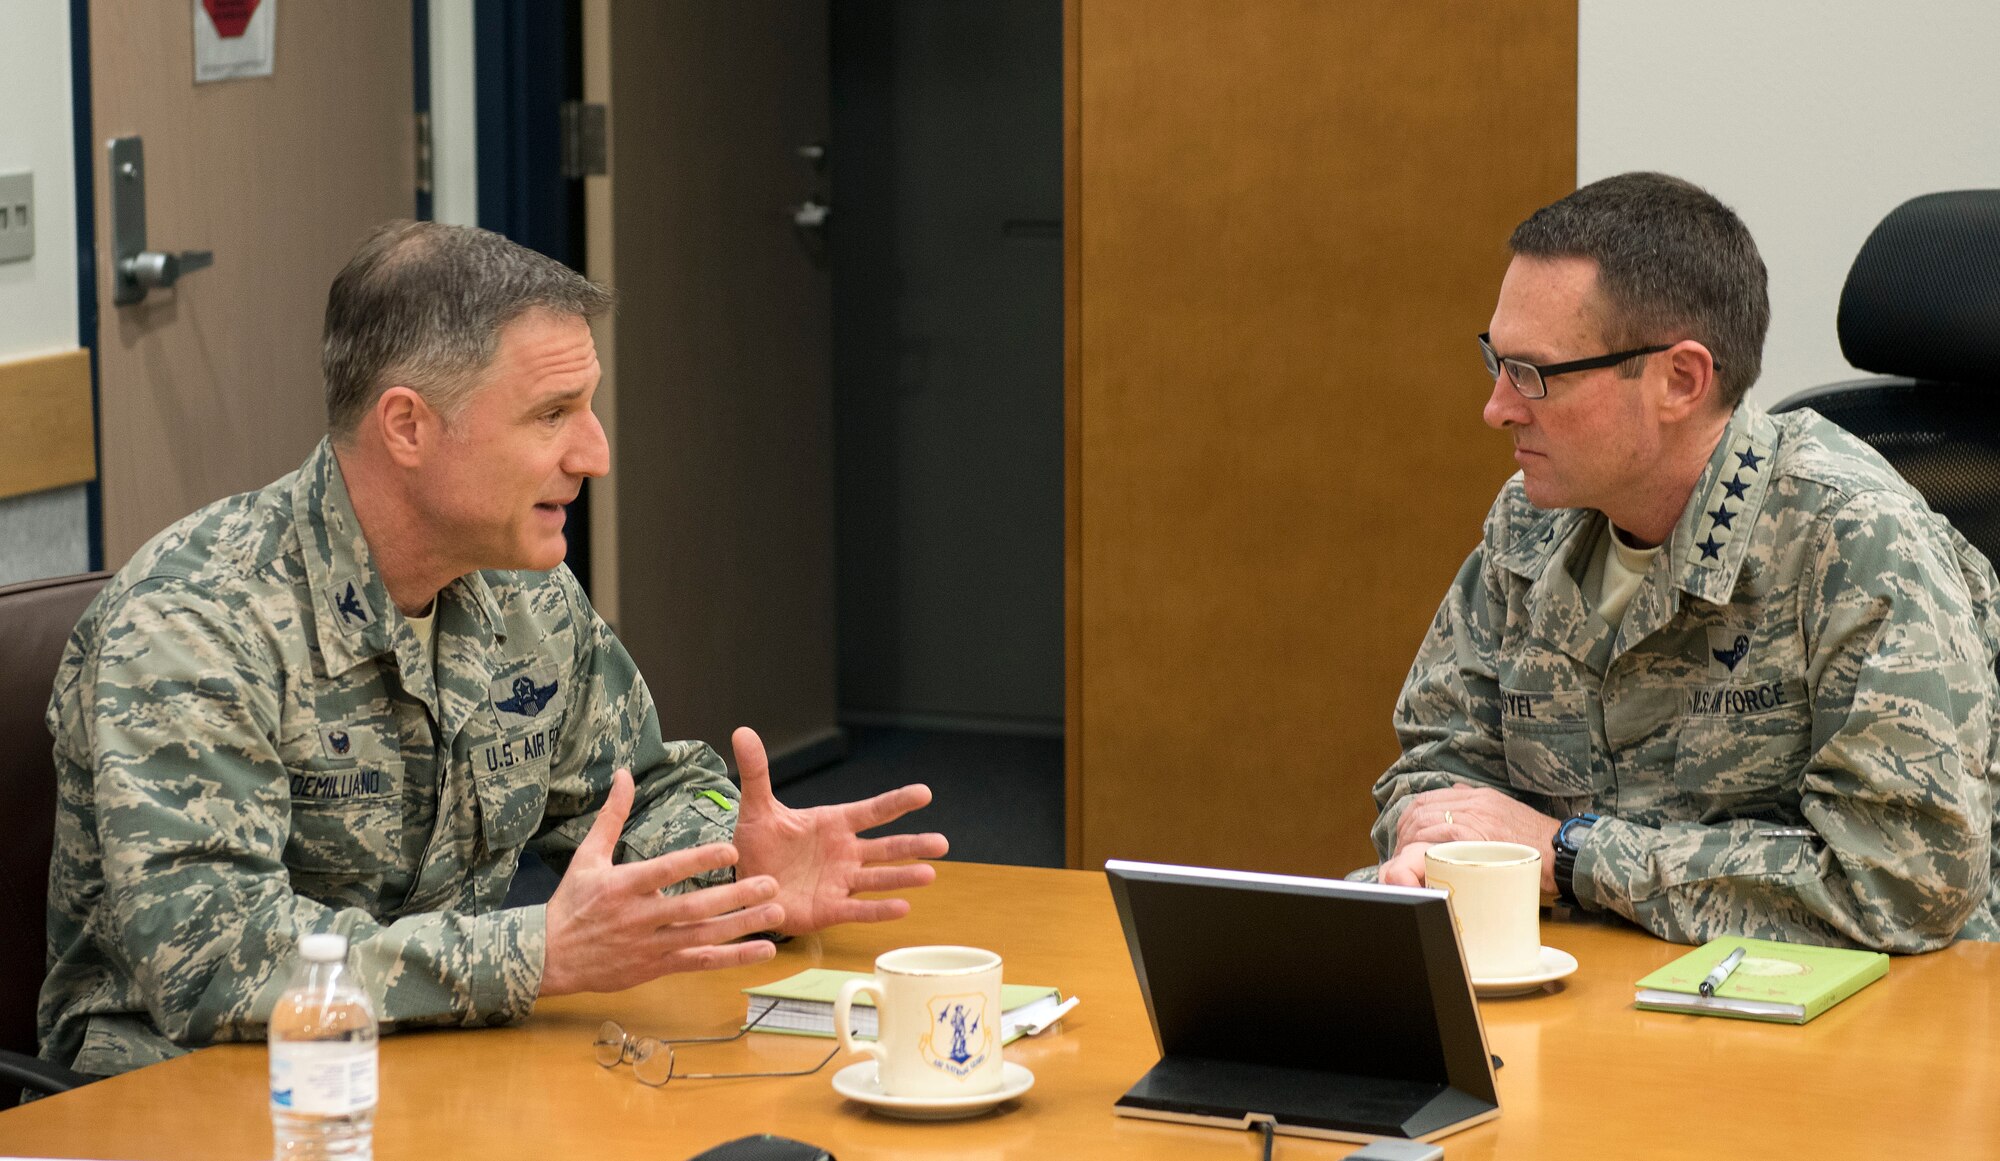 National Guard Bureau Chief Gen. Joseph L. Lengyel (right), the ranking officer in the U.S. National Guard, discusses Alaska Air National Guard capabilities with Col. Steven deMilliano, commander of the Alaska Air National Guard's 176th Wing, here May 7, 2017. Lengyel visited the wing as part of a wider tour of Alaska National Guard installations. While here, he met with the wing's senior leaders, toured maintenance facilities, and met and fielded questions from Airmen of all ranks.